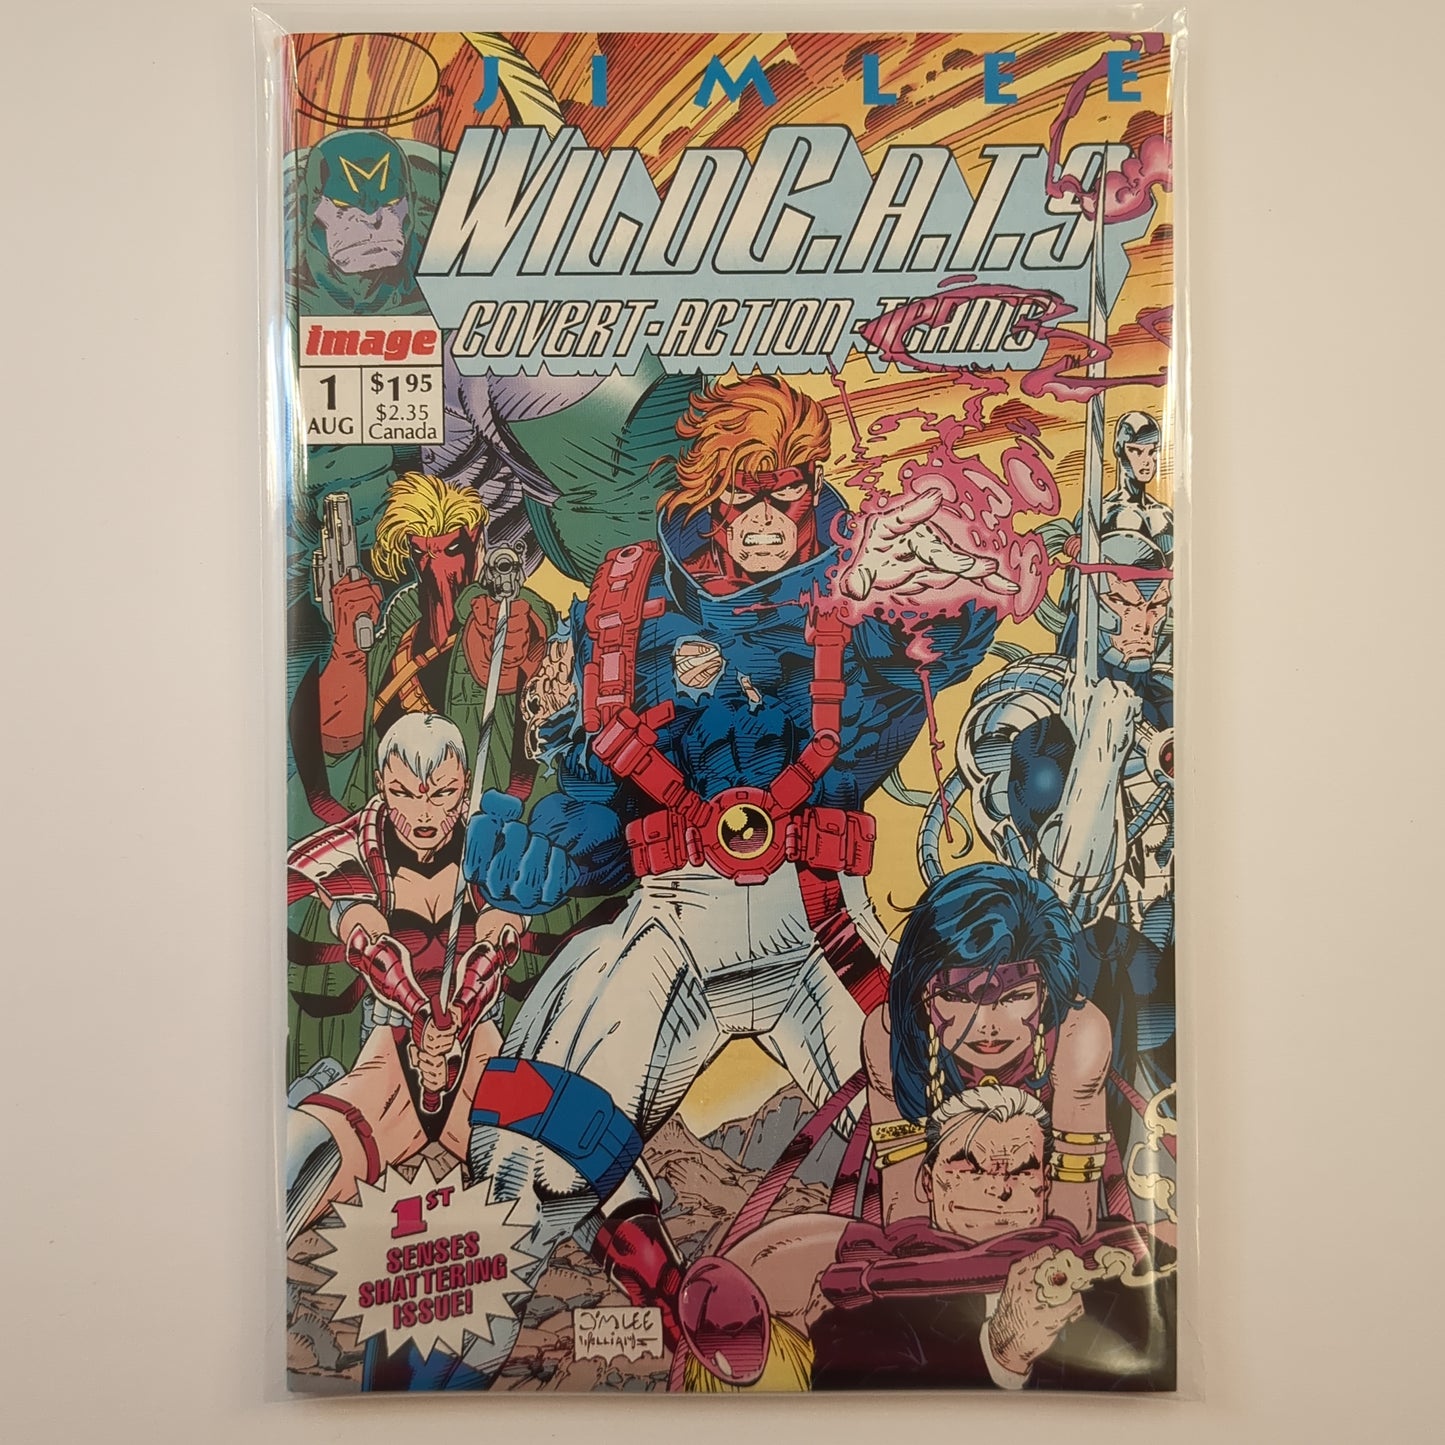 WildC.A.T.S: Covert Action Teams (1992)